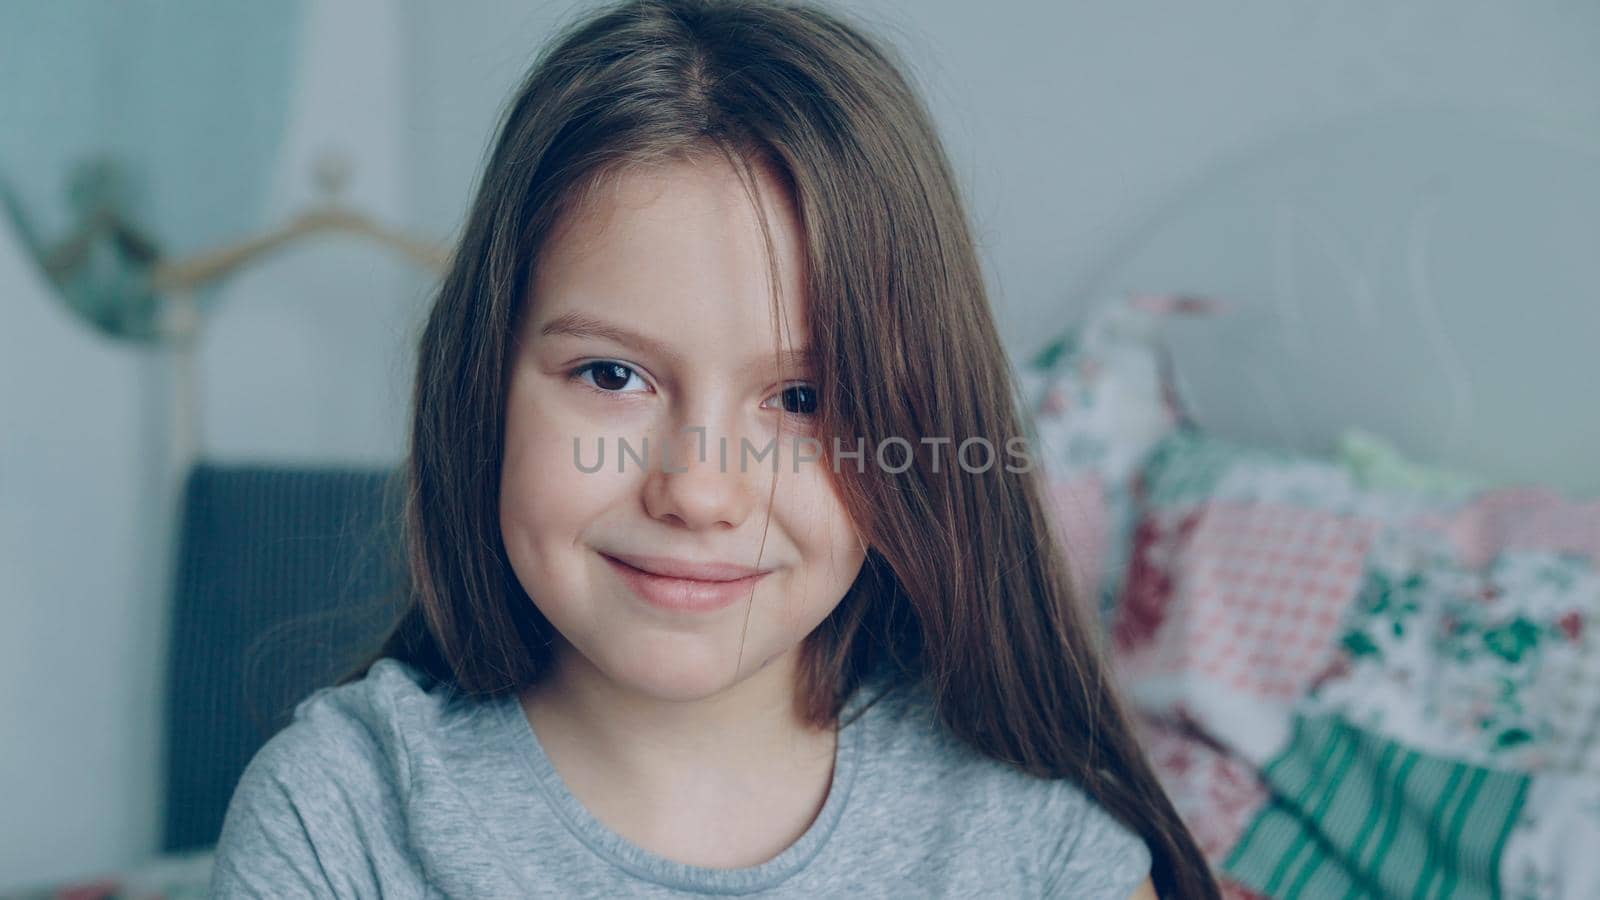 Close-up portrait of little cute girl looking at the camera and smiling kindly in cozy bedroom at home